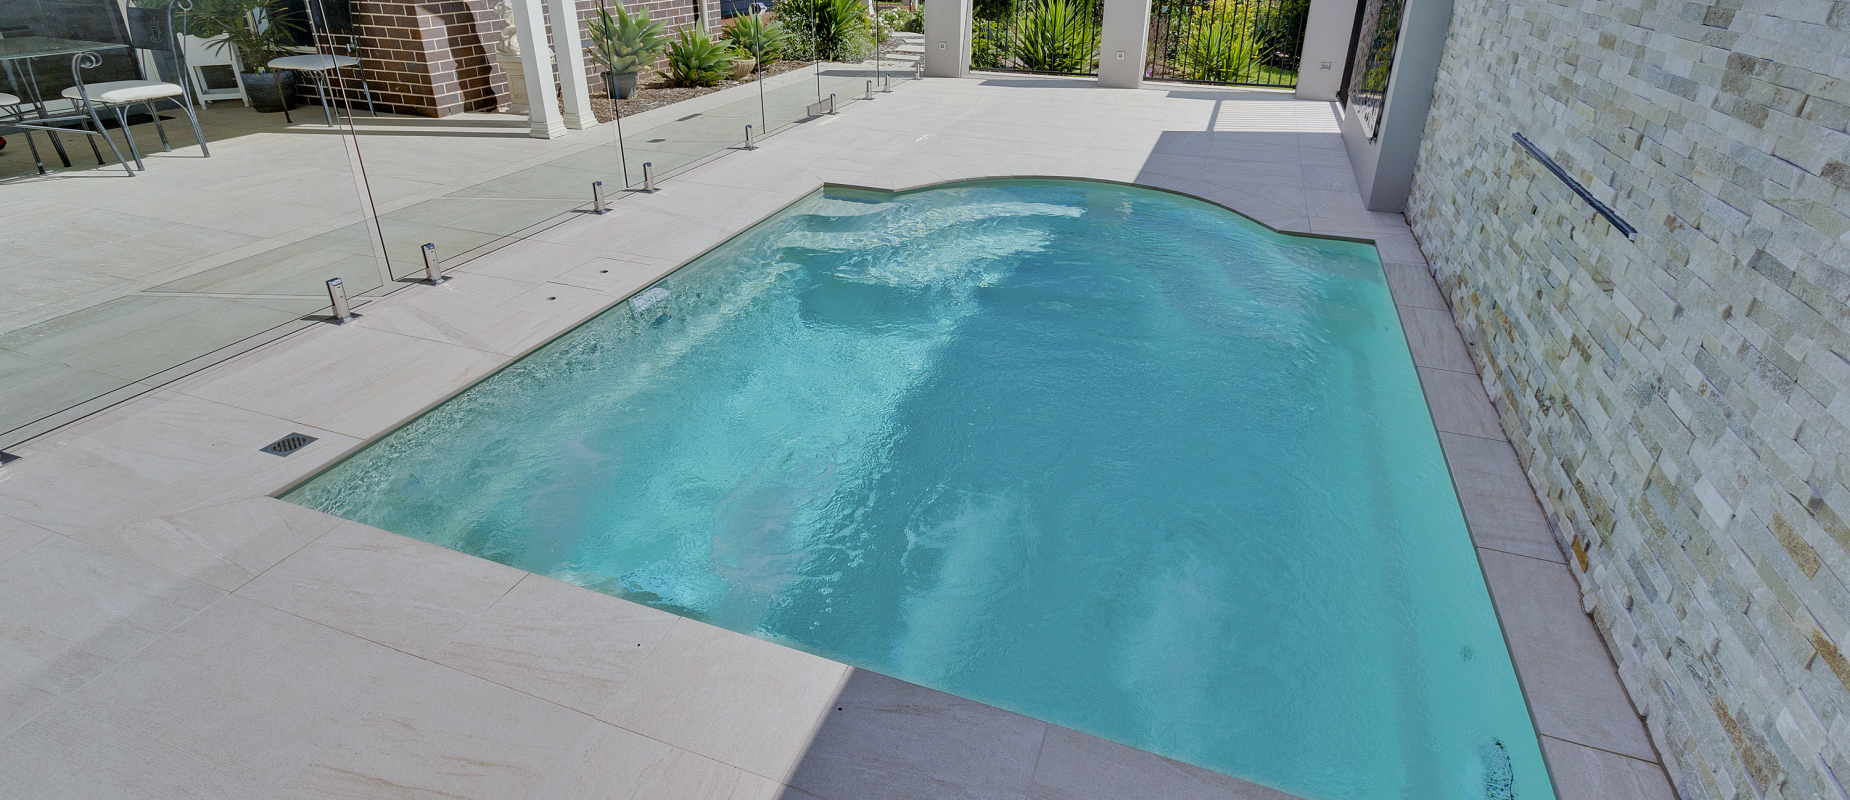 Compass-Pools-Australia_Plunge-Courtyard_Small-pool-with-water-wall